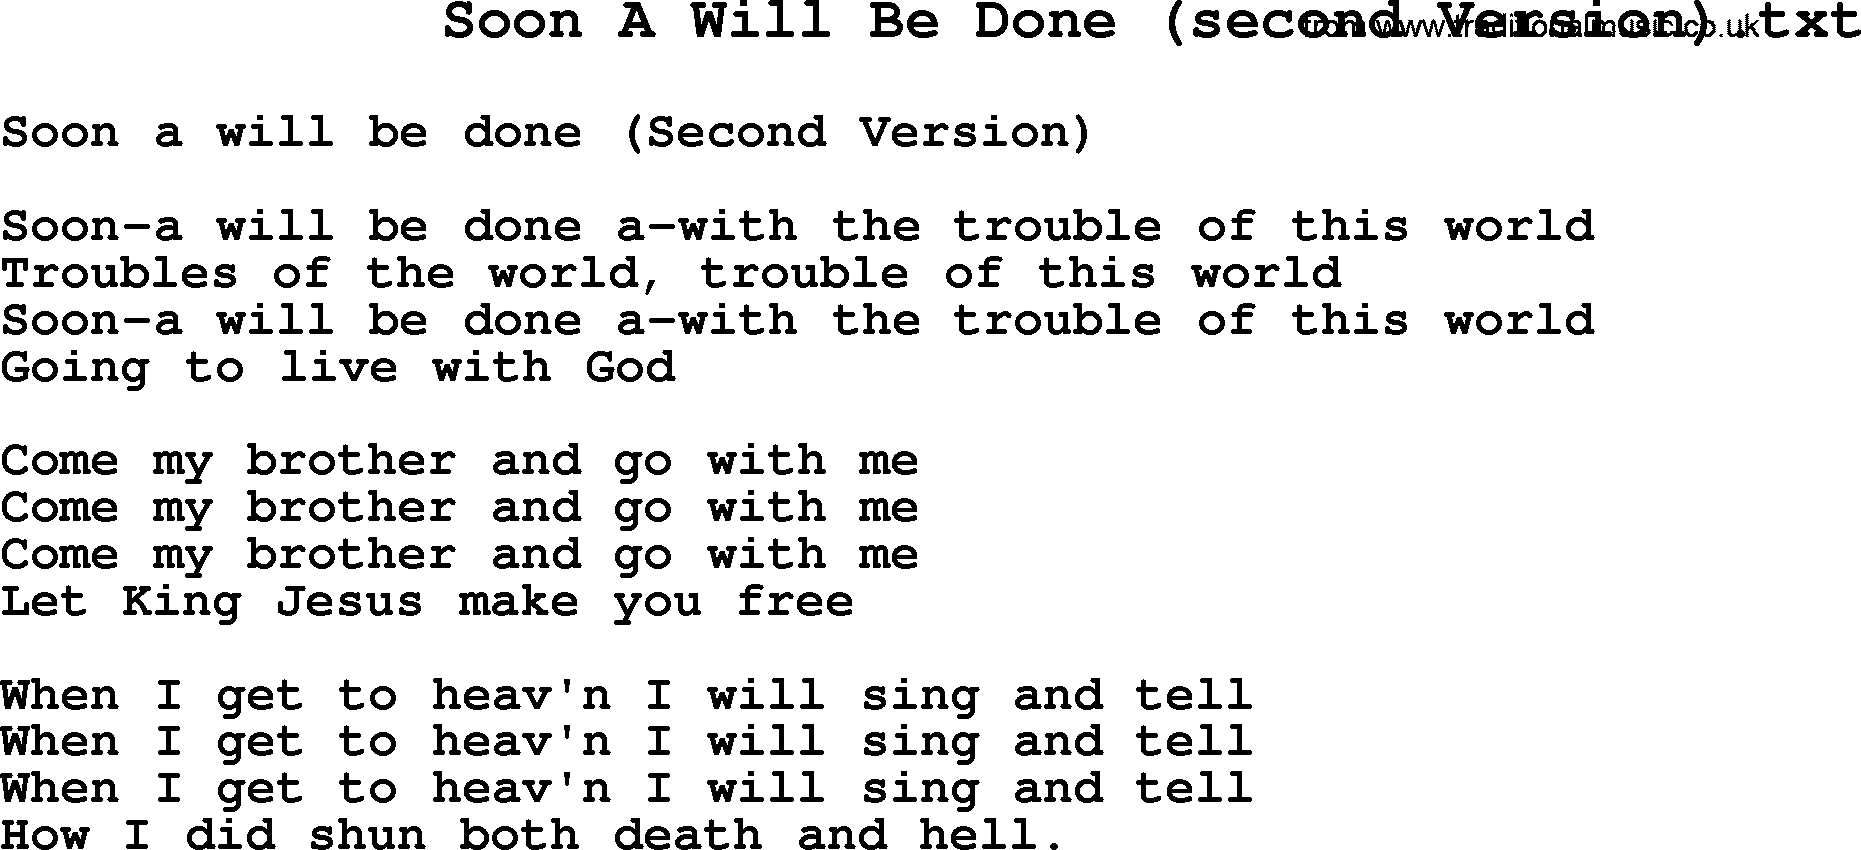 Negro Spiritual Song Lyrics for Soon A Will Be Done(2)